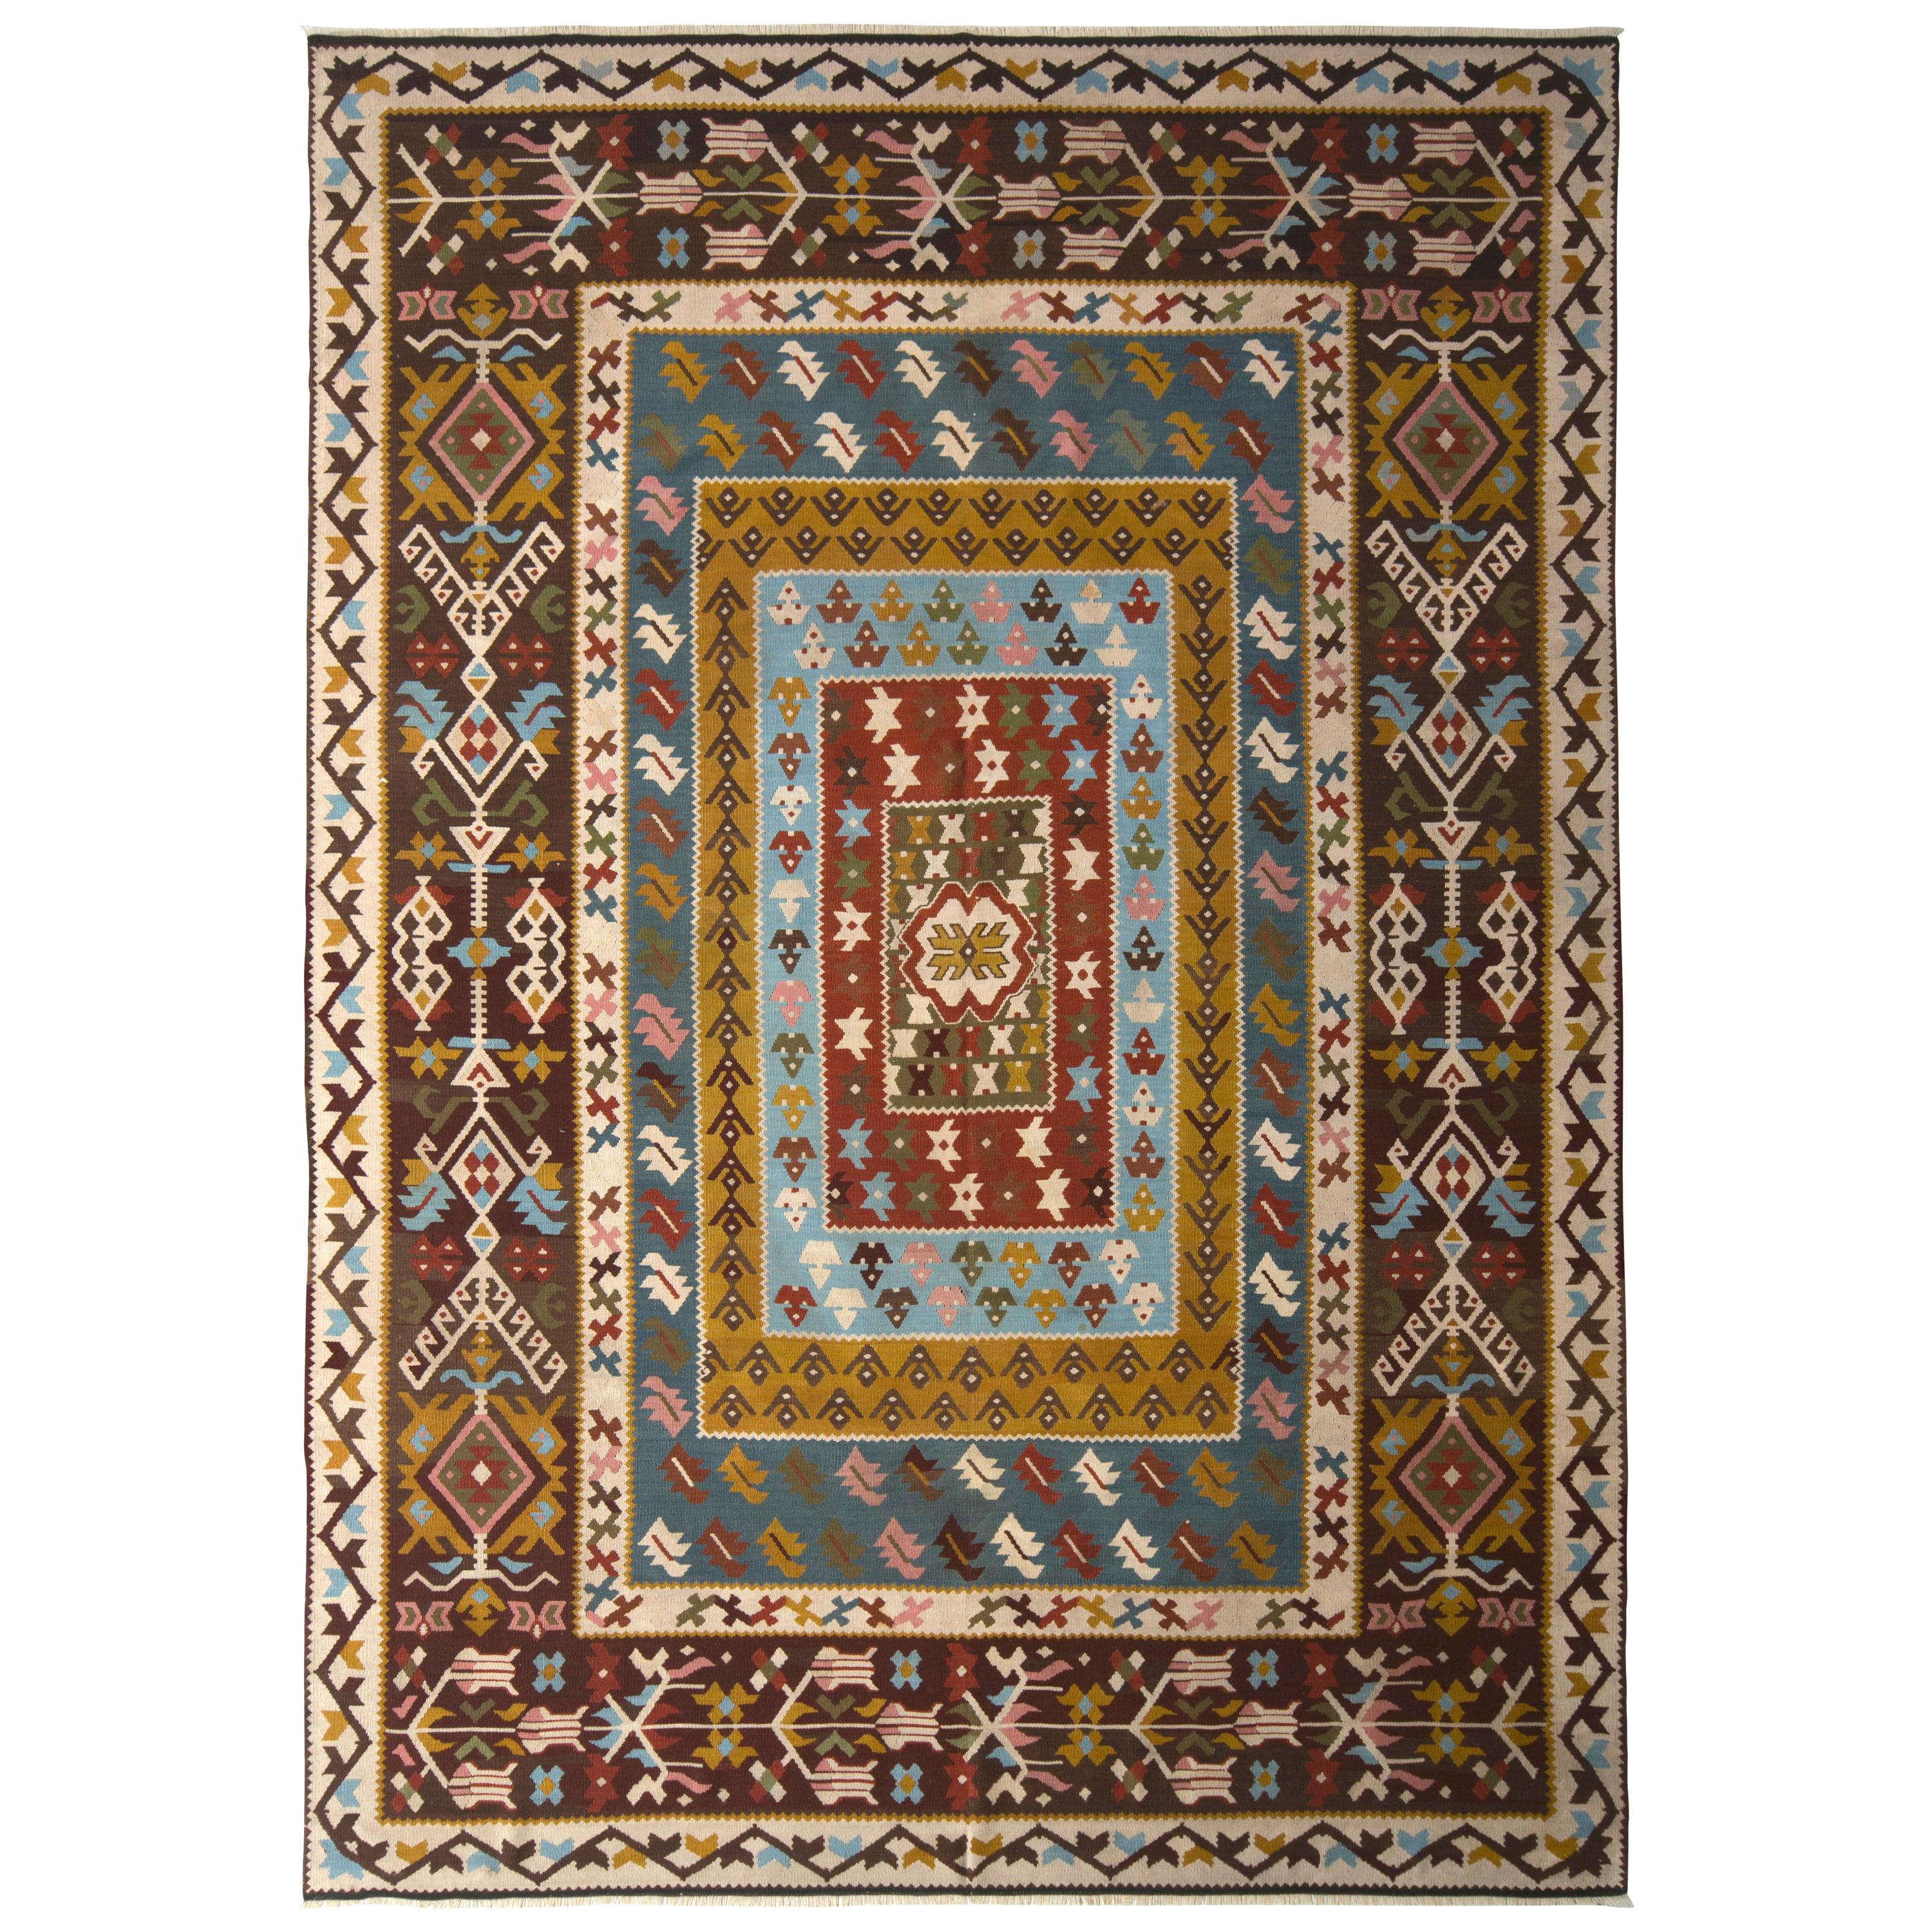 Antique Kilim Rug Blue and Beige Brown All-Over Geometric Pattern by Rug & Kilim For Sale